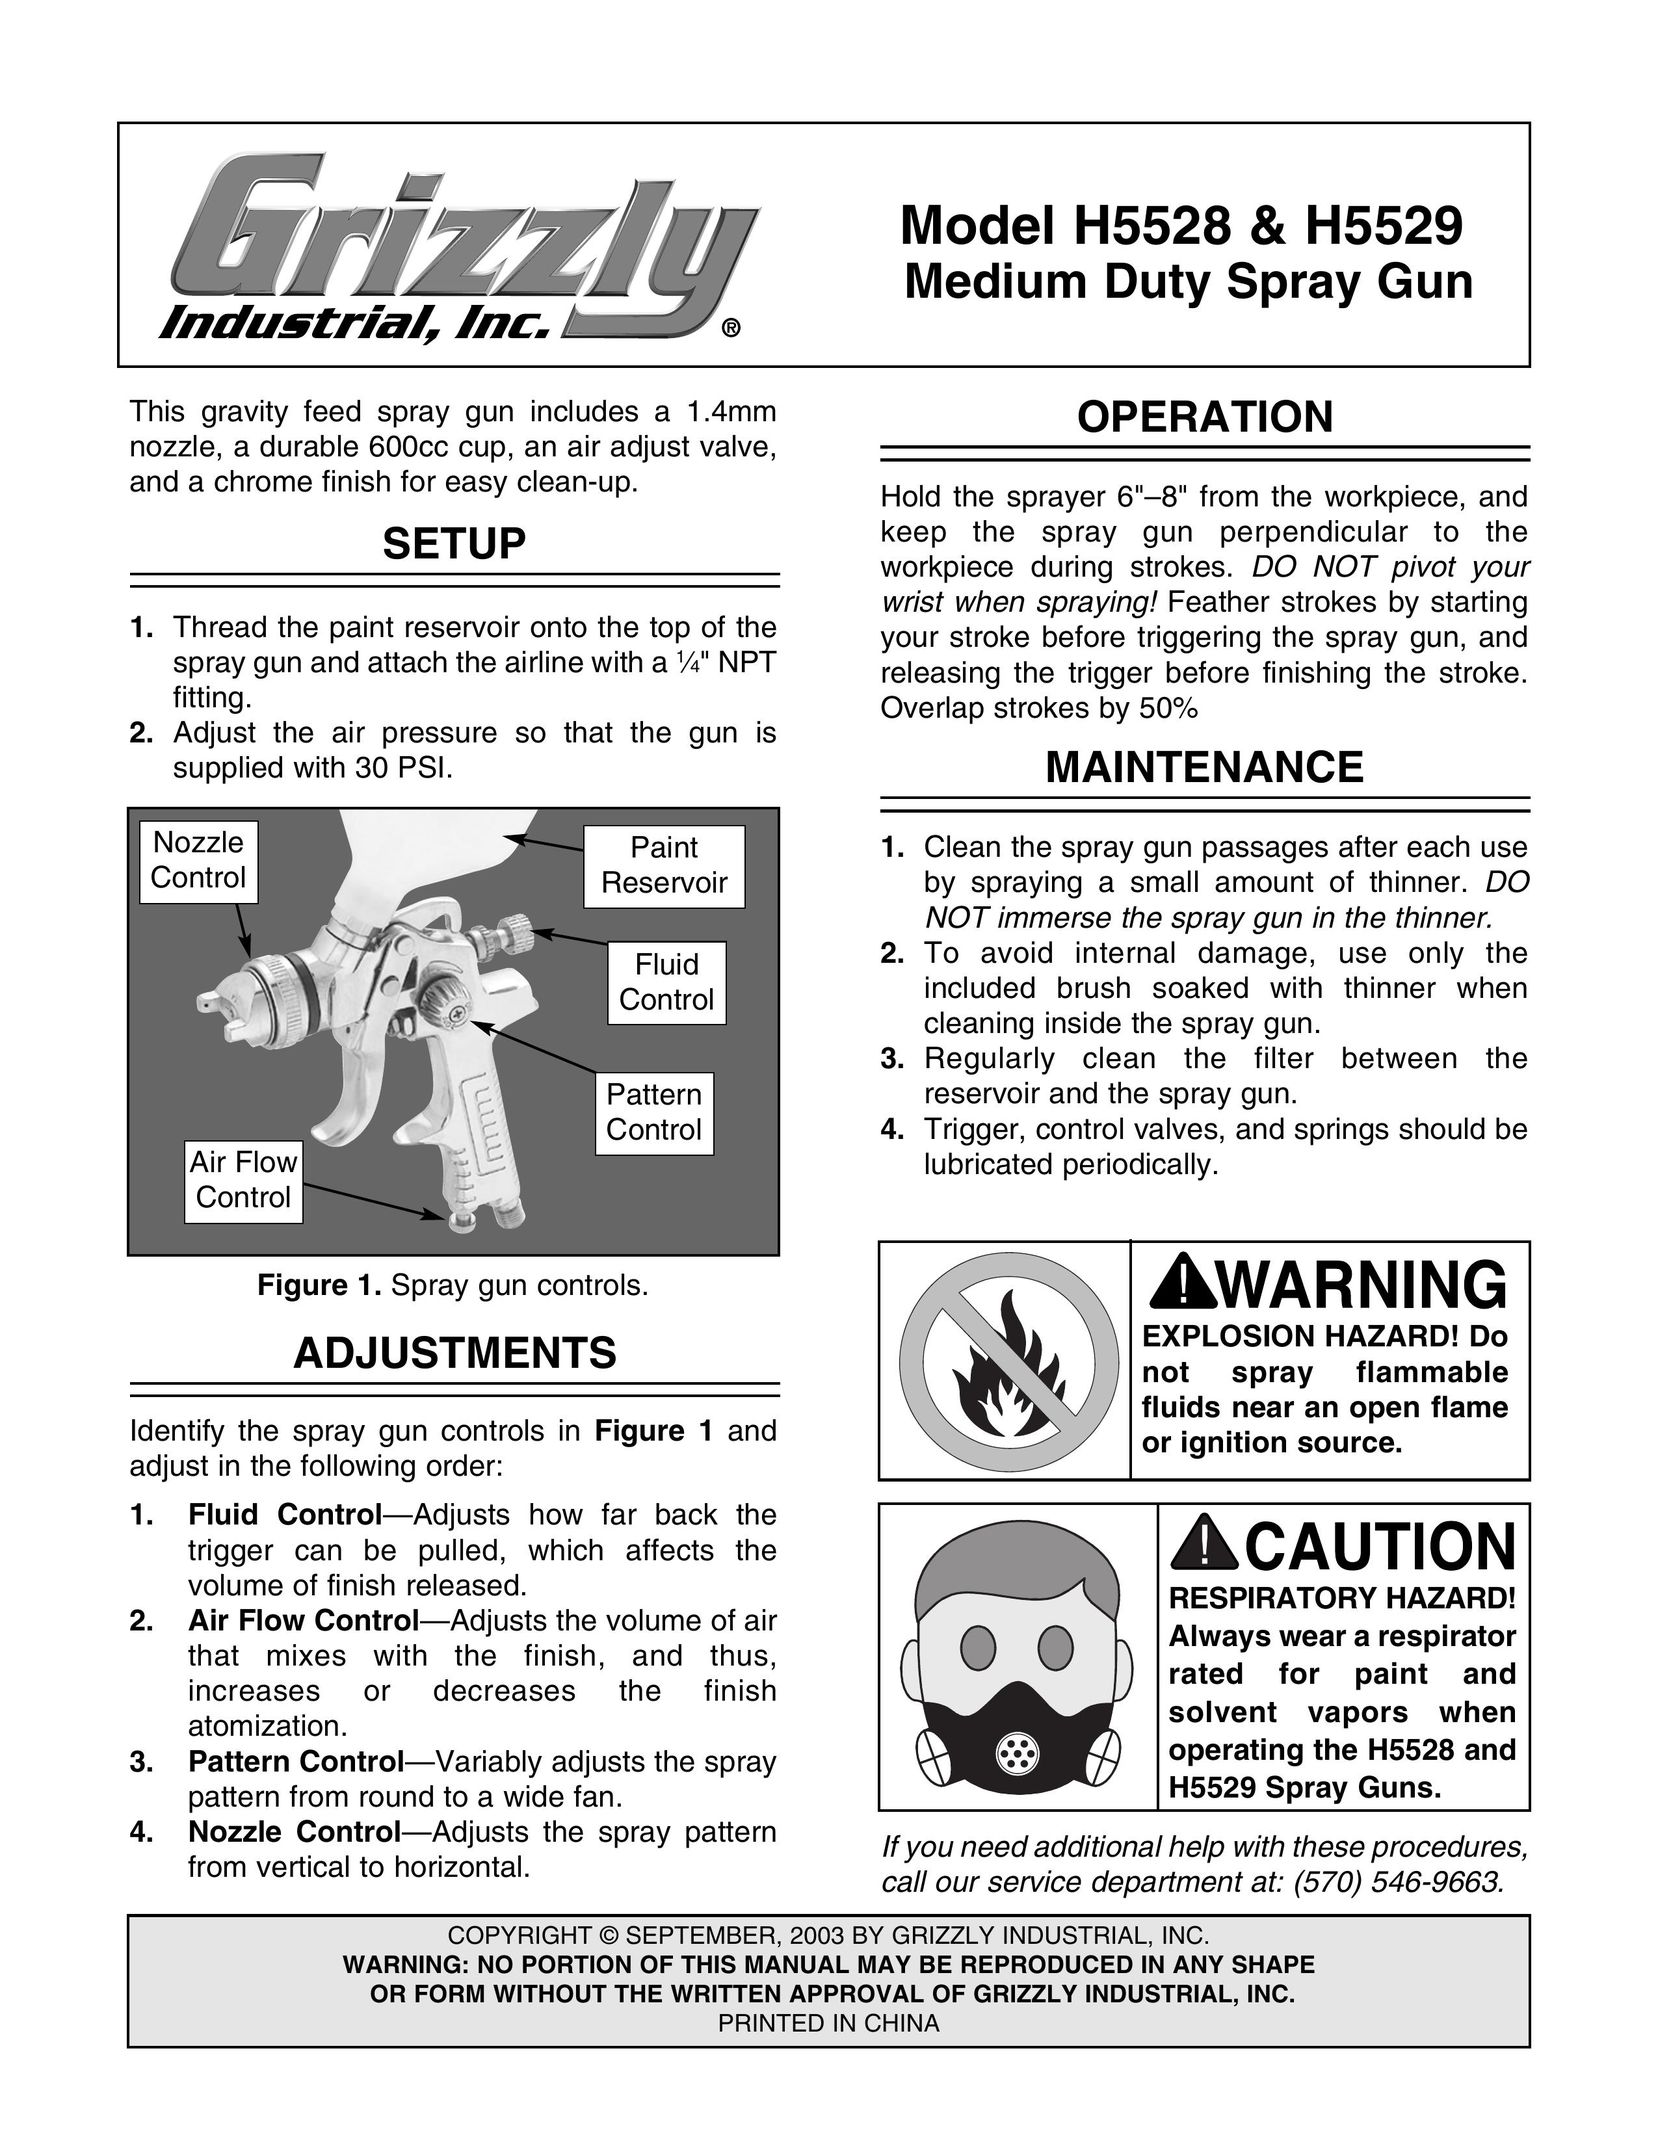 Grizzly H5529 Paint Sprayer User Manual